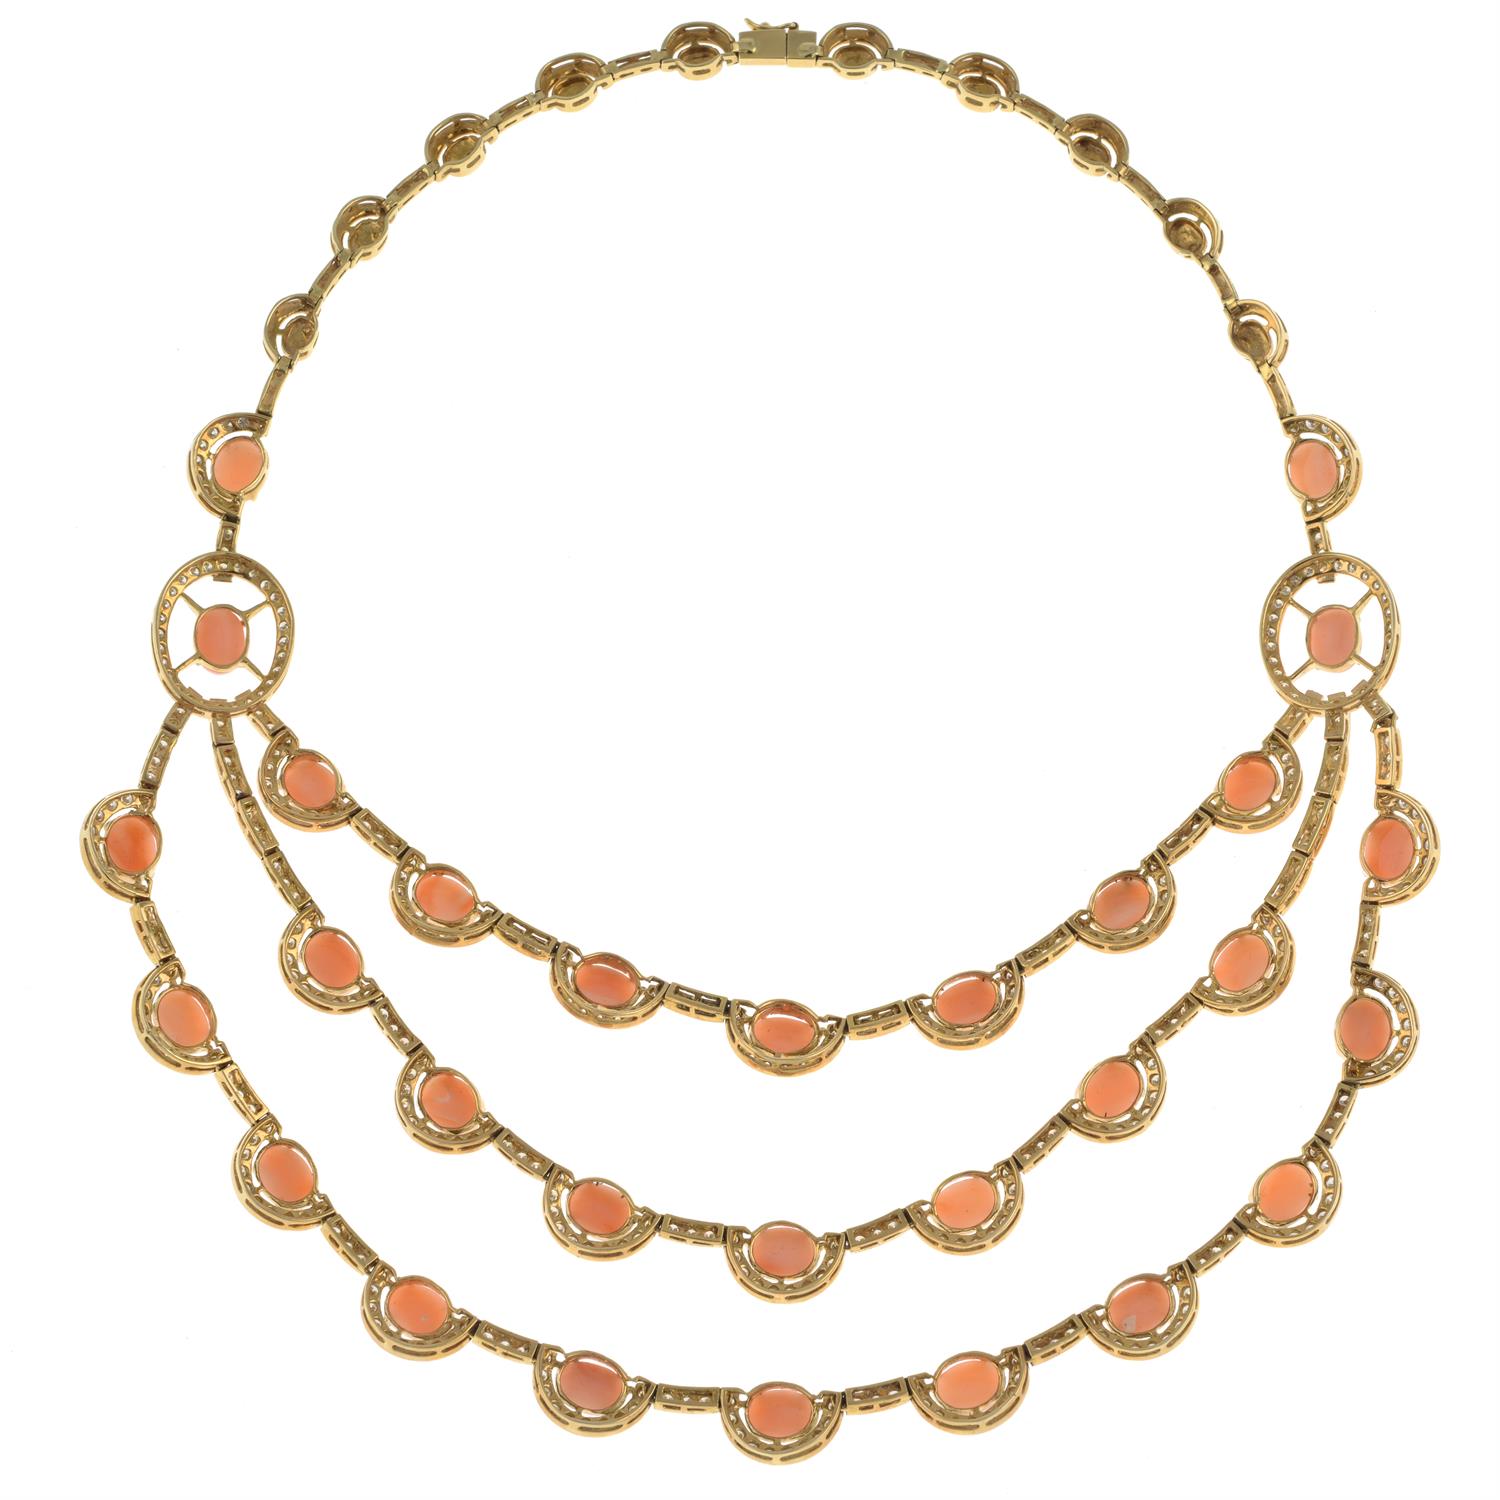 Coral and diamond necklace - Image 5 of 6